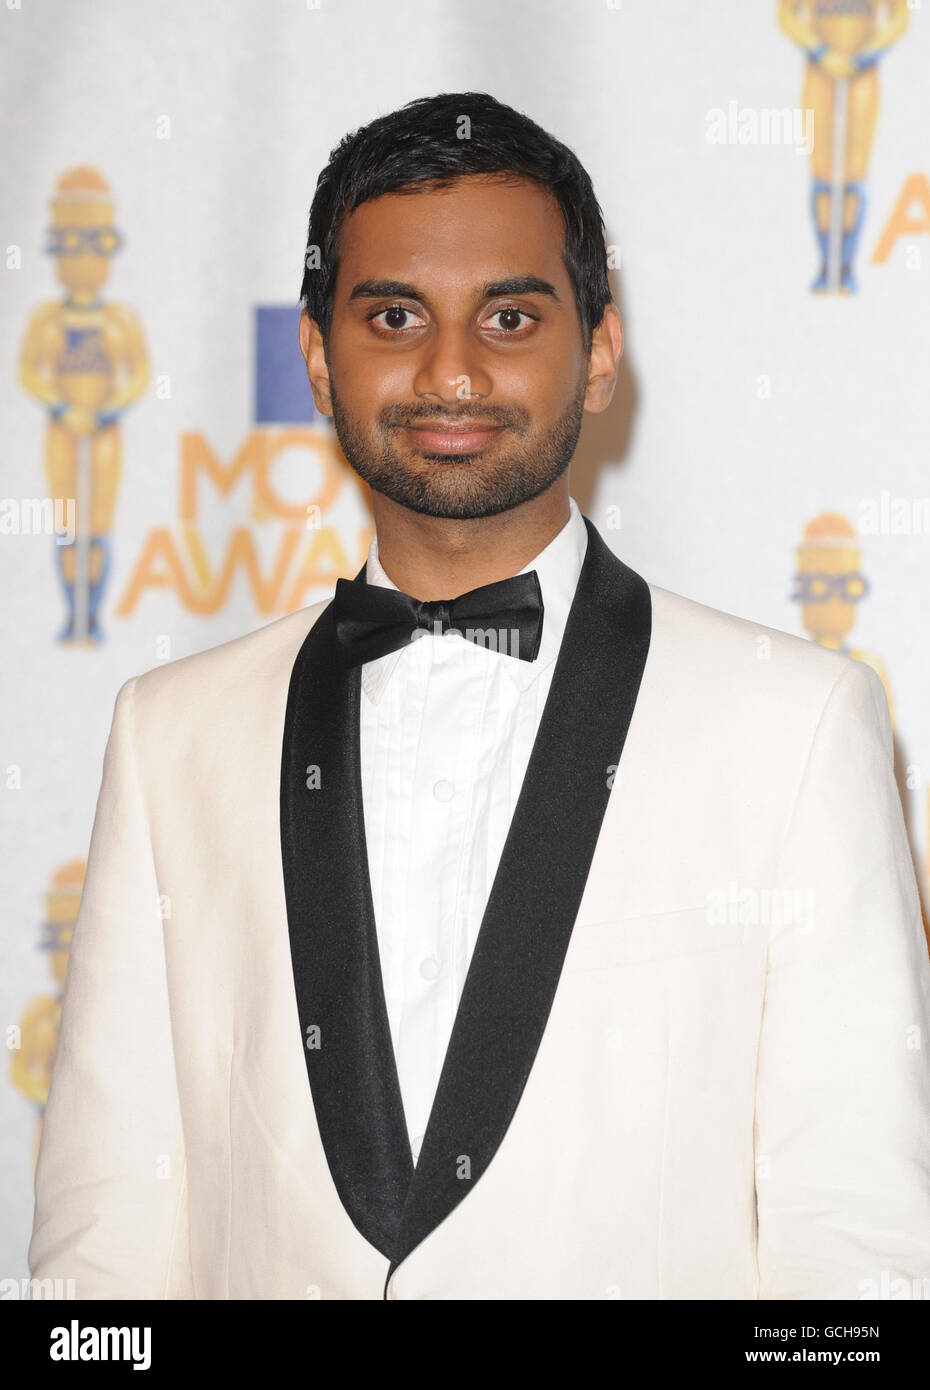 Aziz Ansar at the 2010 MTV Movie Awards, Universal Studios, Los Angeles. PRESS ASSOCIATION Photo. Picture date: Sunday June 6, 2010. Photo credit should read: PA Wire Stock Photo